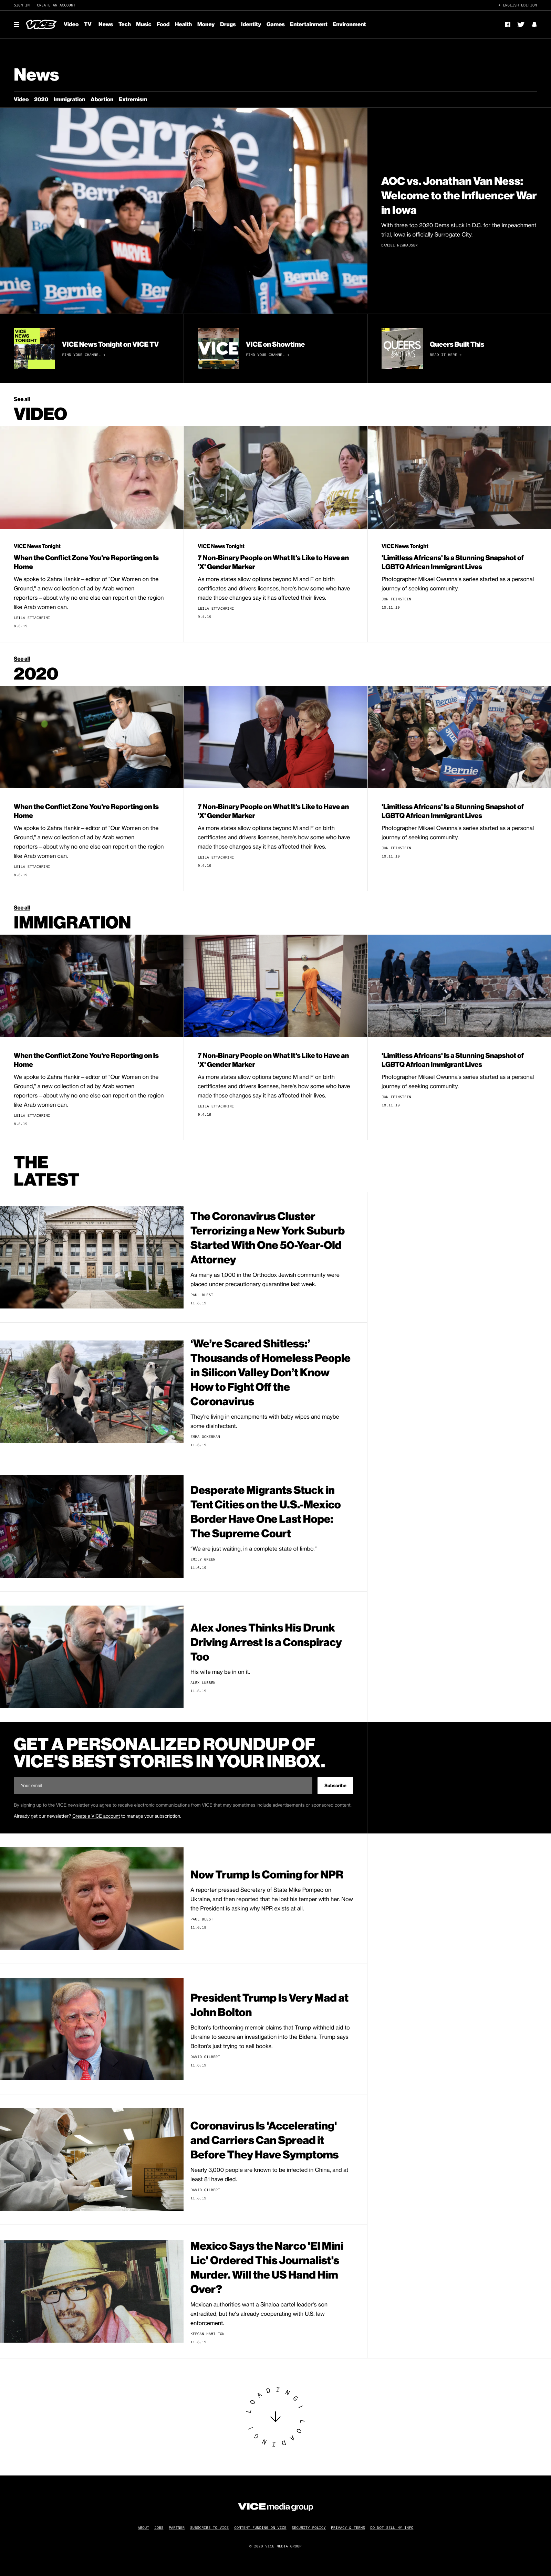 News section page